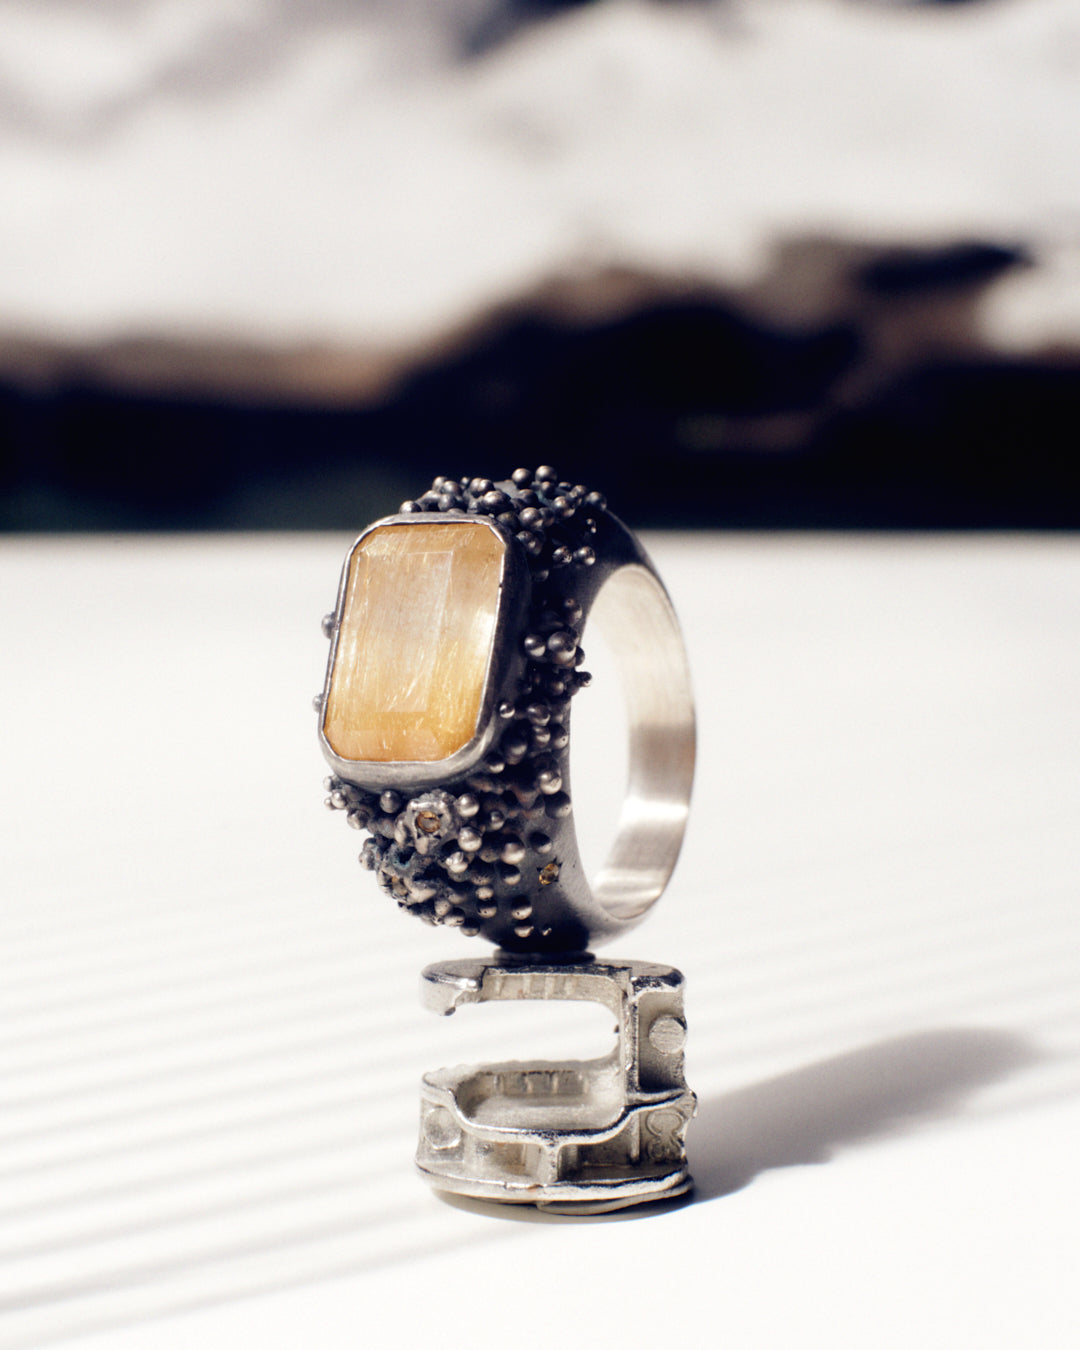  A massif sterling silver ring with a beautiful emerald-cut rutilated quartz and six yellow sapphires. The ring is hand sculpted and cast in sterling silver with a deep black patina. Made by Violette Stehli. Photo by Daniel Antropik.